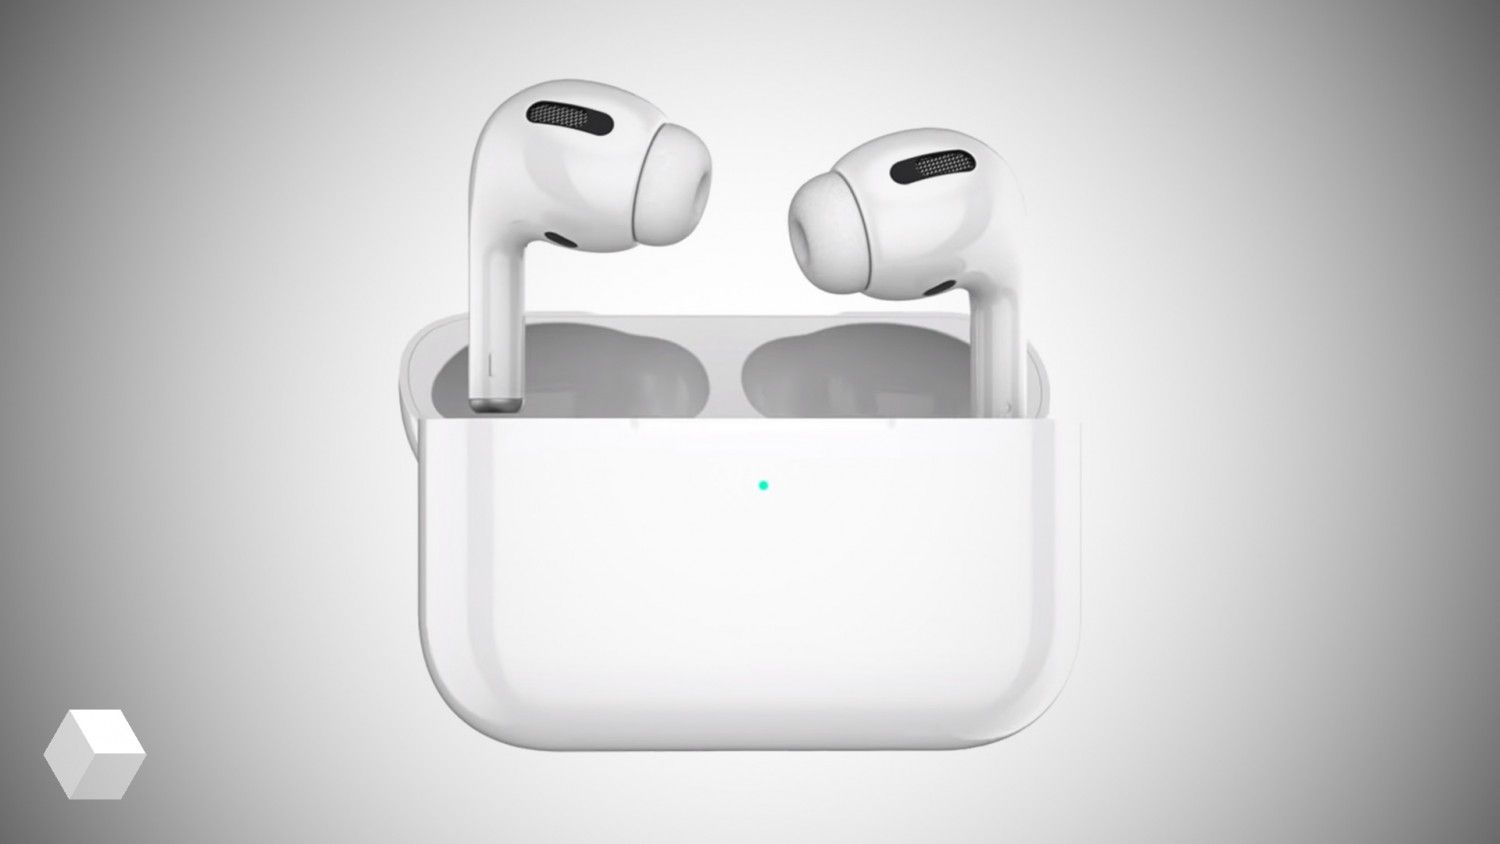 Airpods шипят. Беспроводная гарнитура Apple AIRPODS Pro 2. Наушники Apple AIRPODS 3rd Generation. Apple AIRPODS Pro 2022. Apple наушники беспроводные AIRPODS Pro 2022.